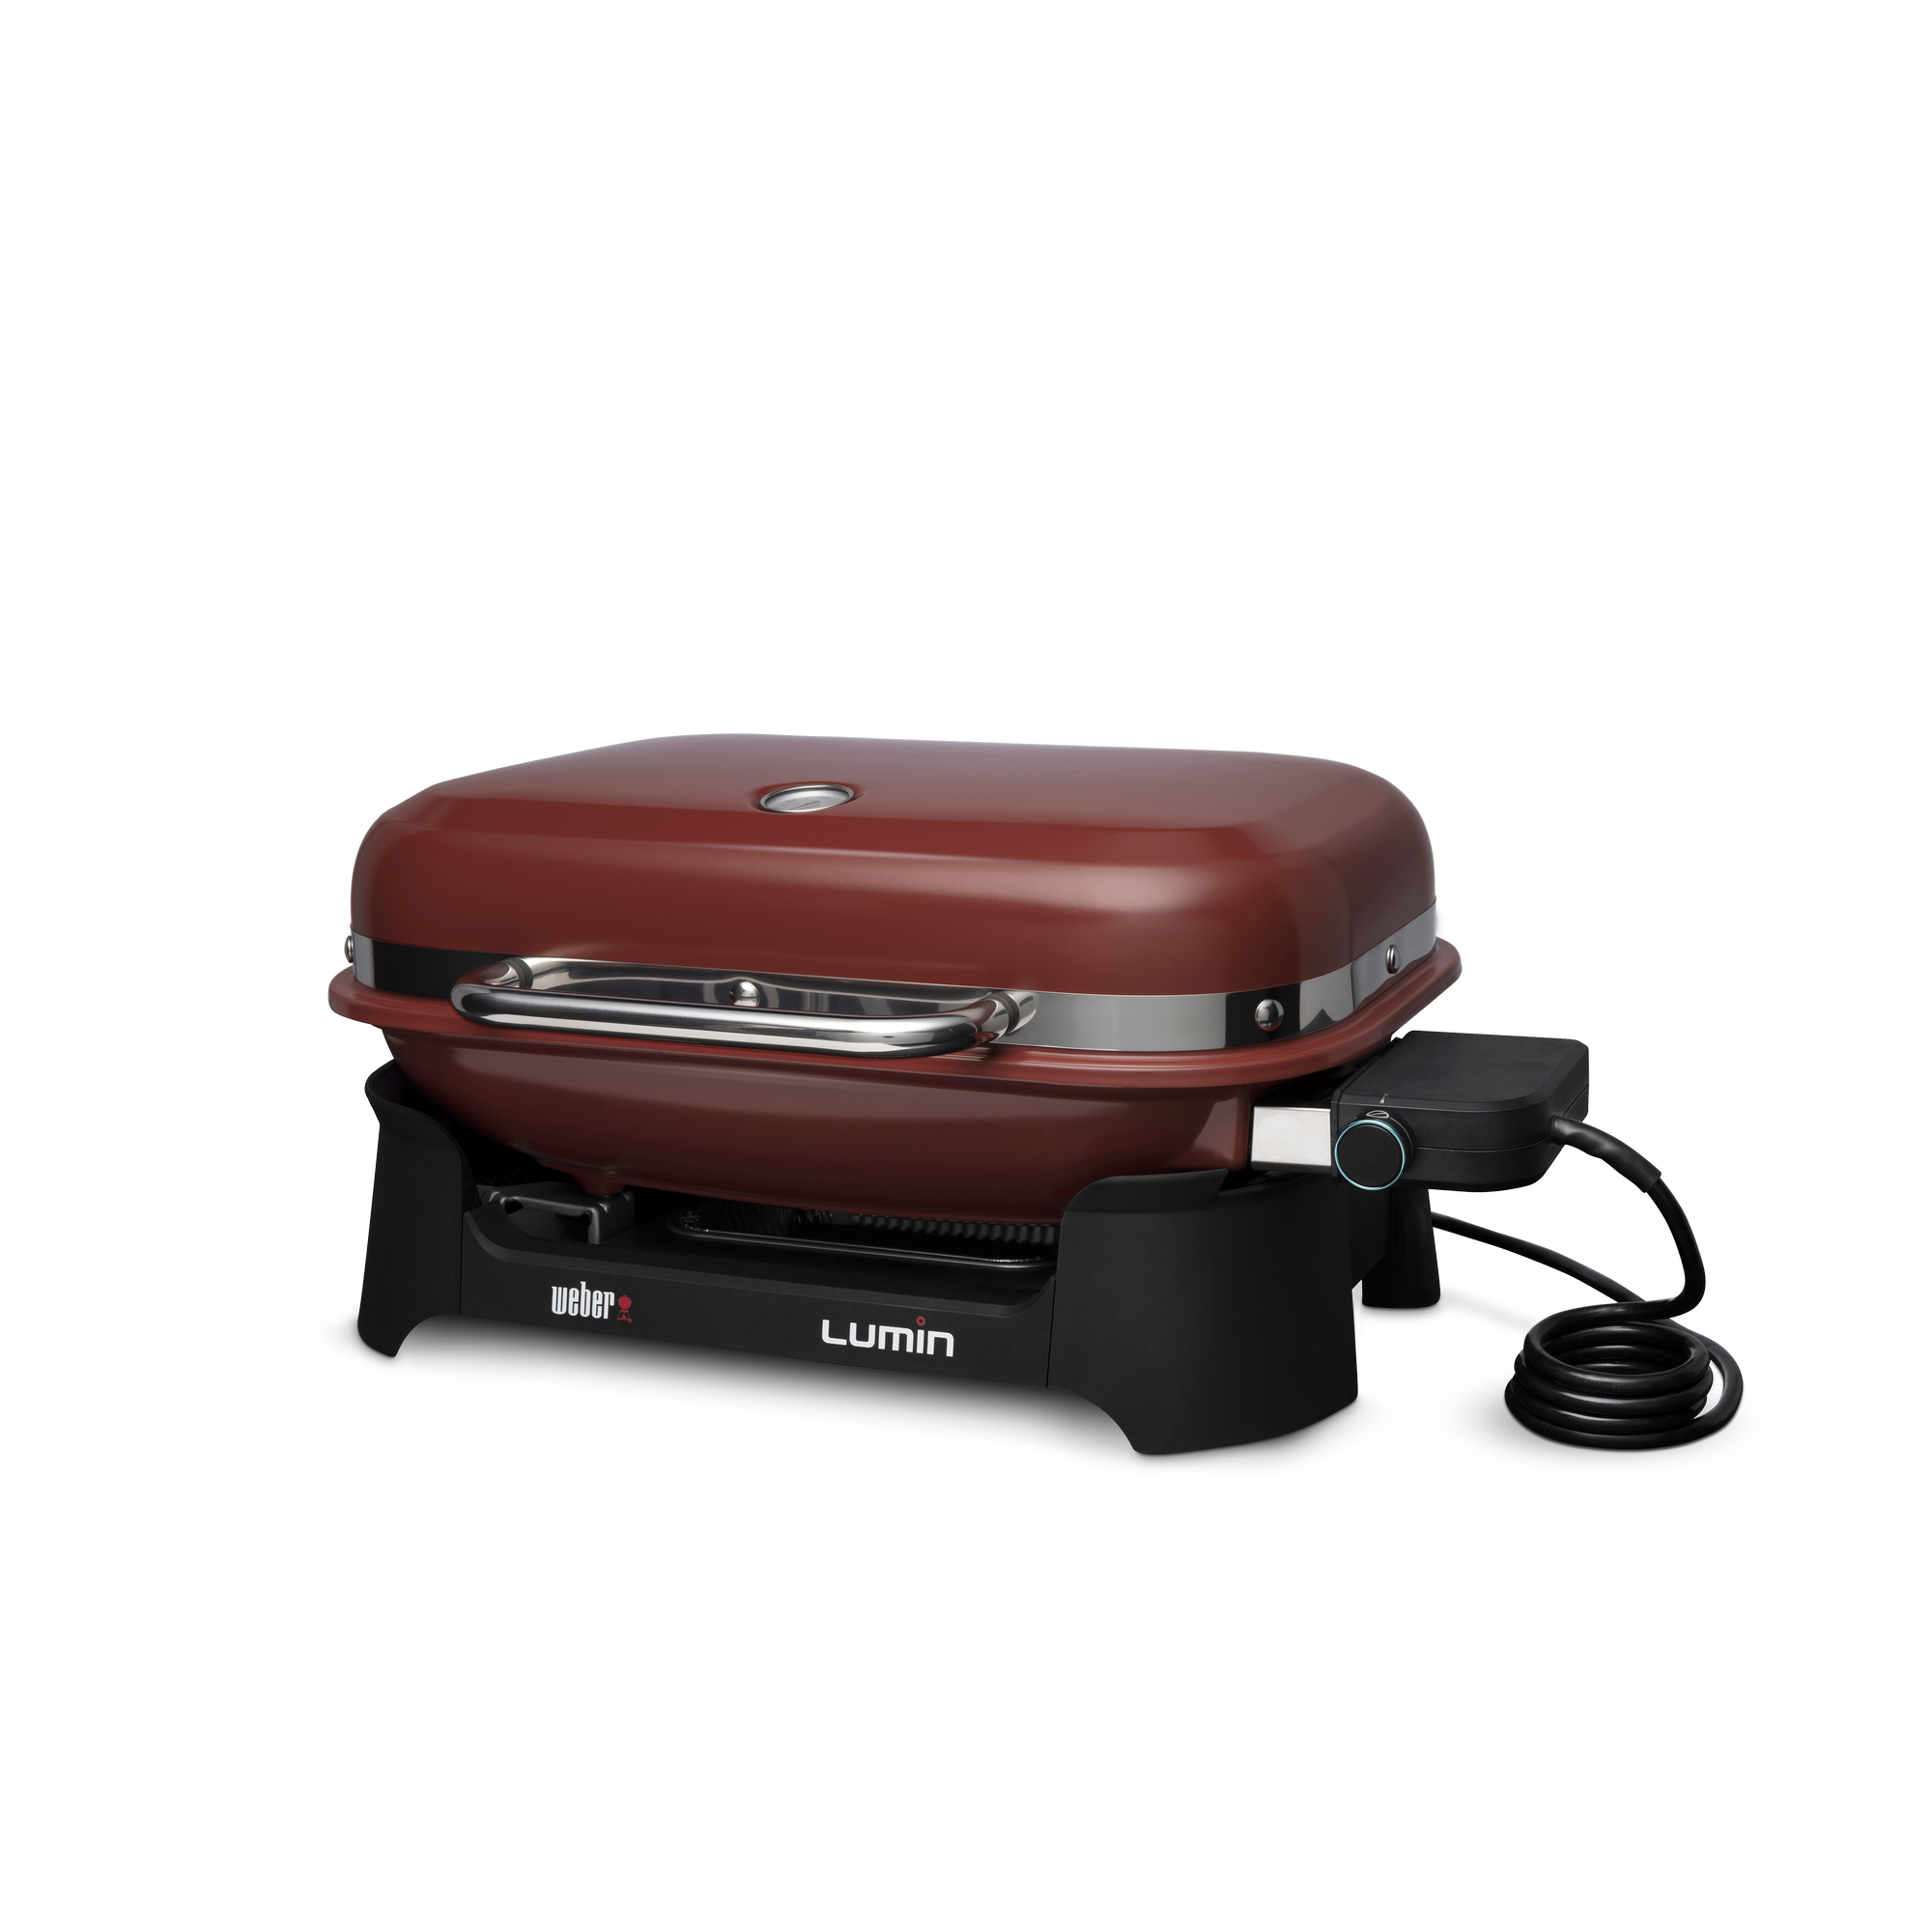 Elektrogrill 'Lumin' rot 2200 W + product picture